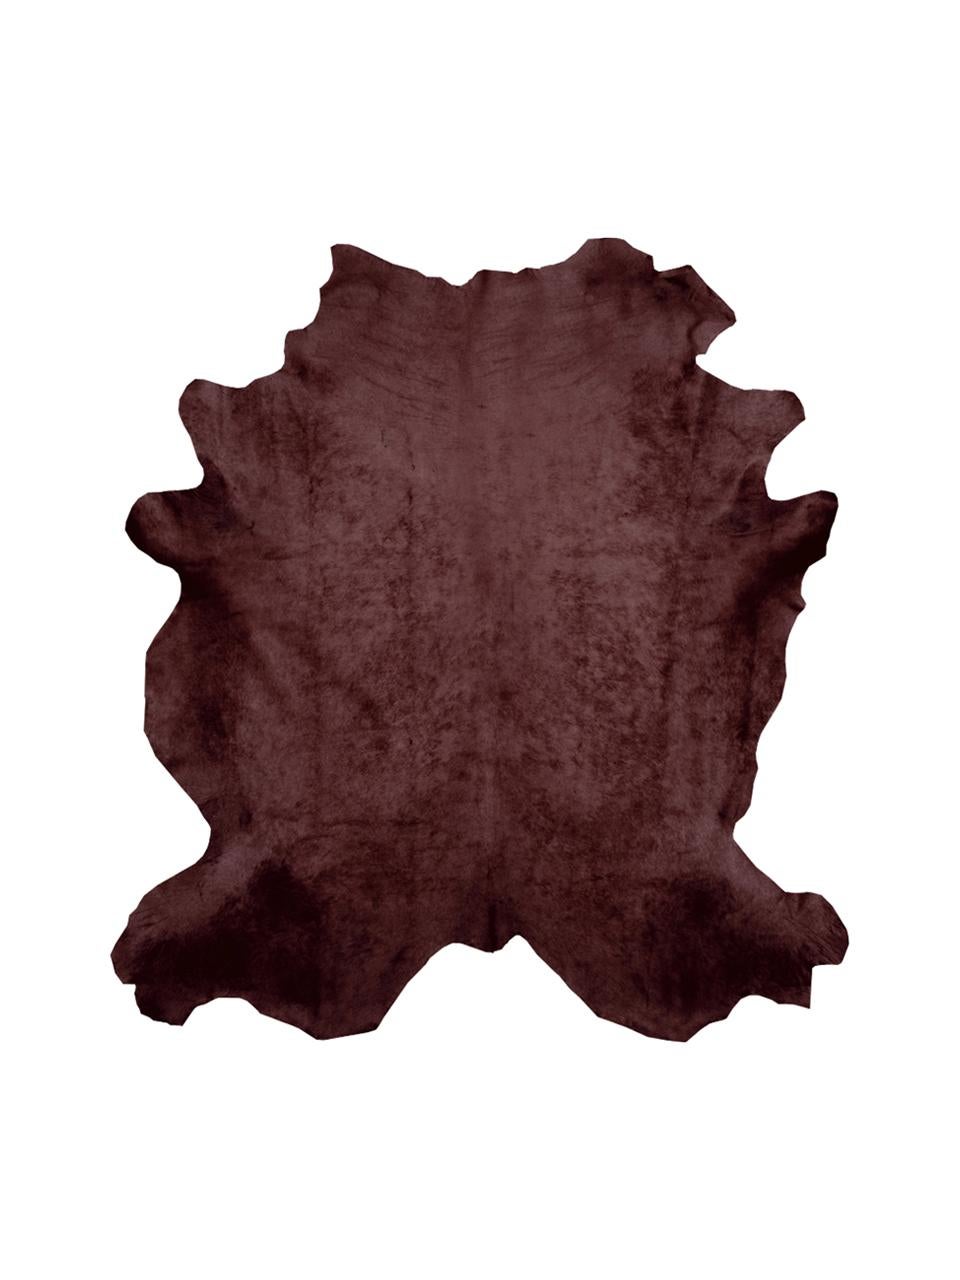 All of our cowhide rugs are full hides and measure approximately 7' W x 8' L. They are of the highest quality from the French region of Normandy and naturally raised in a free roaming field. The hair of these cows is very special and offers a unique